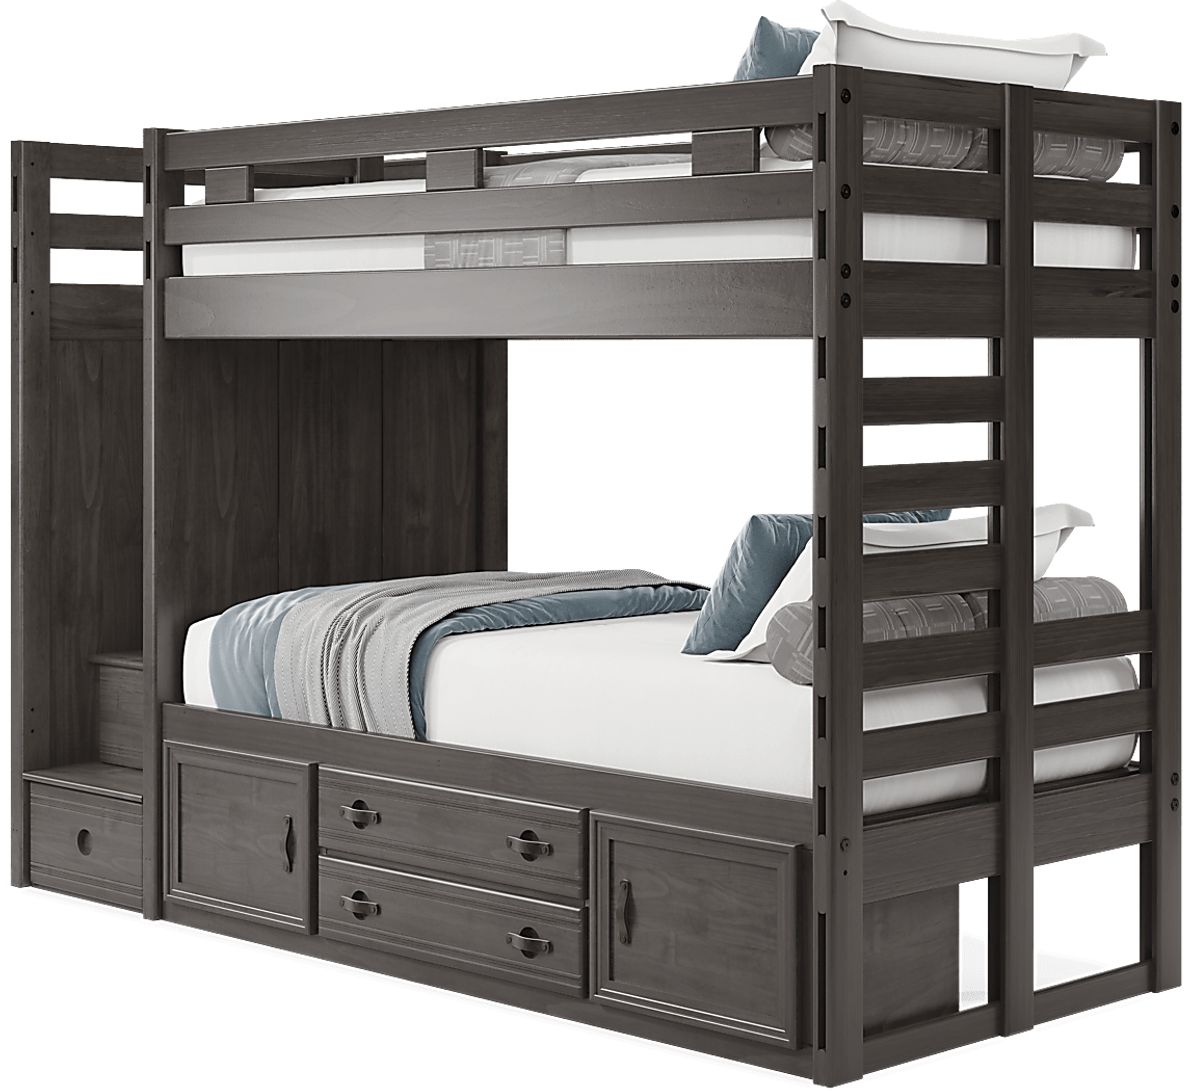 Kids Creekside 2.0 Charcoal Twin/Twin Step Bunk Bed with Storage Rail